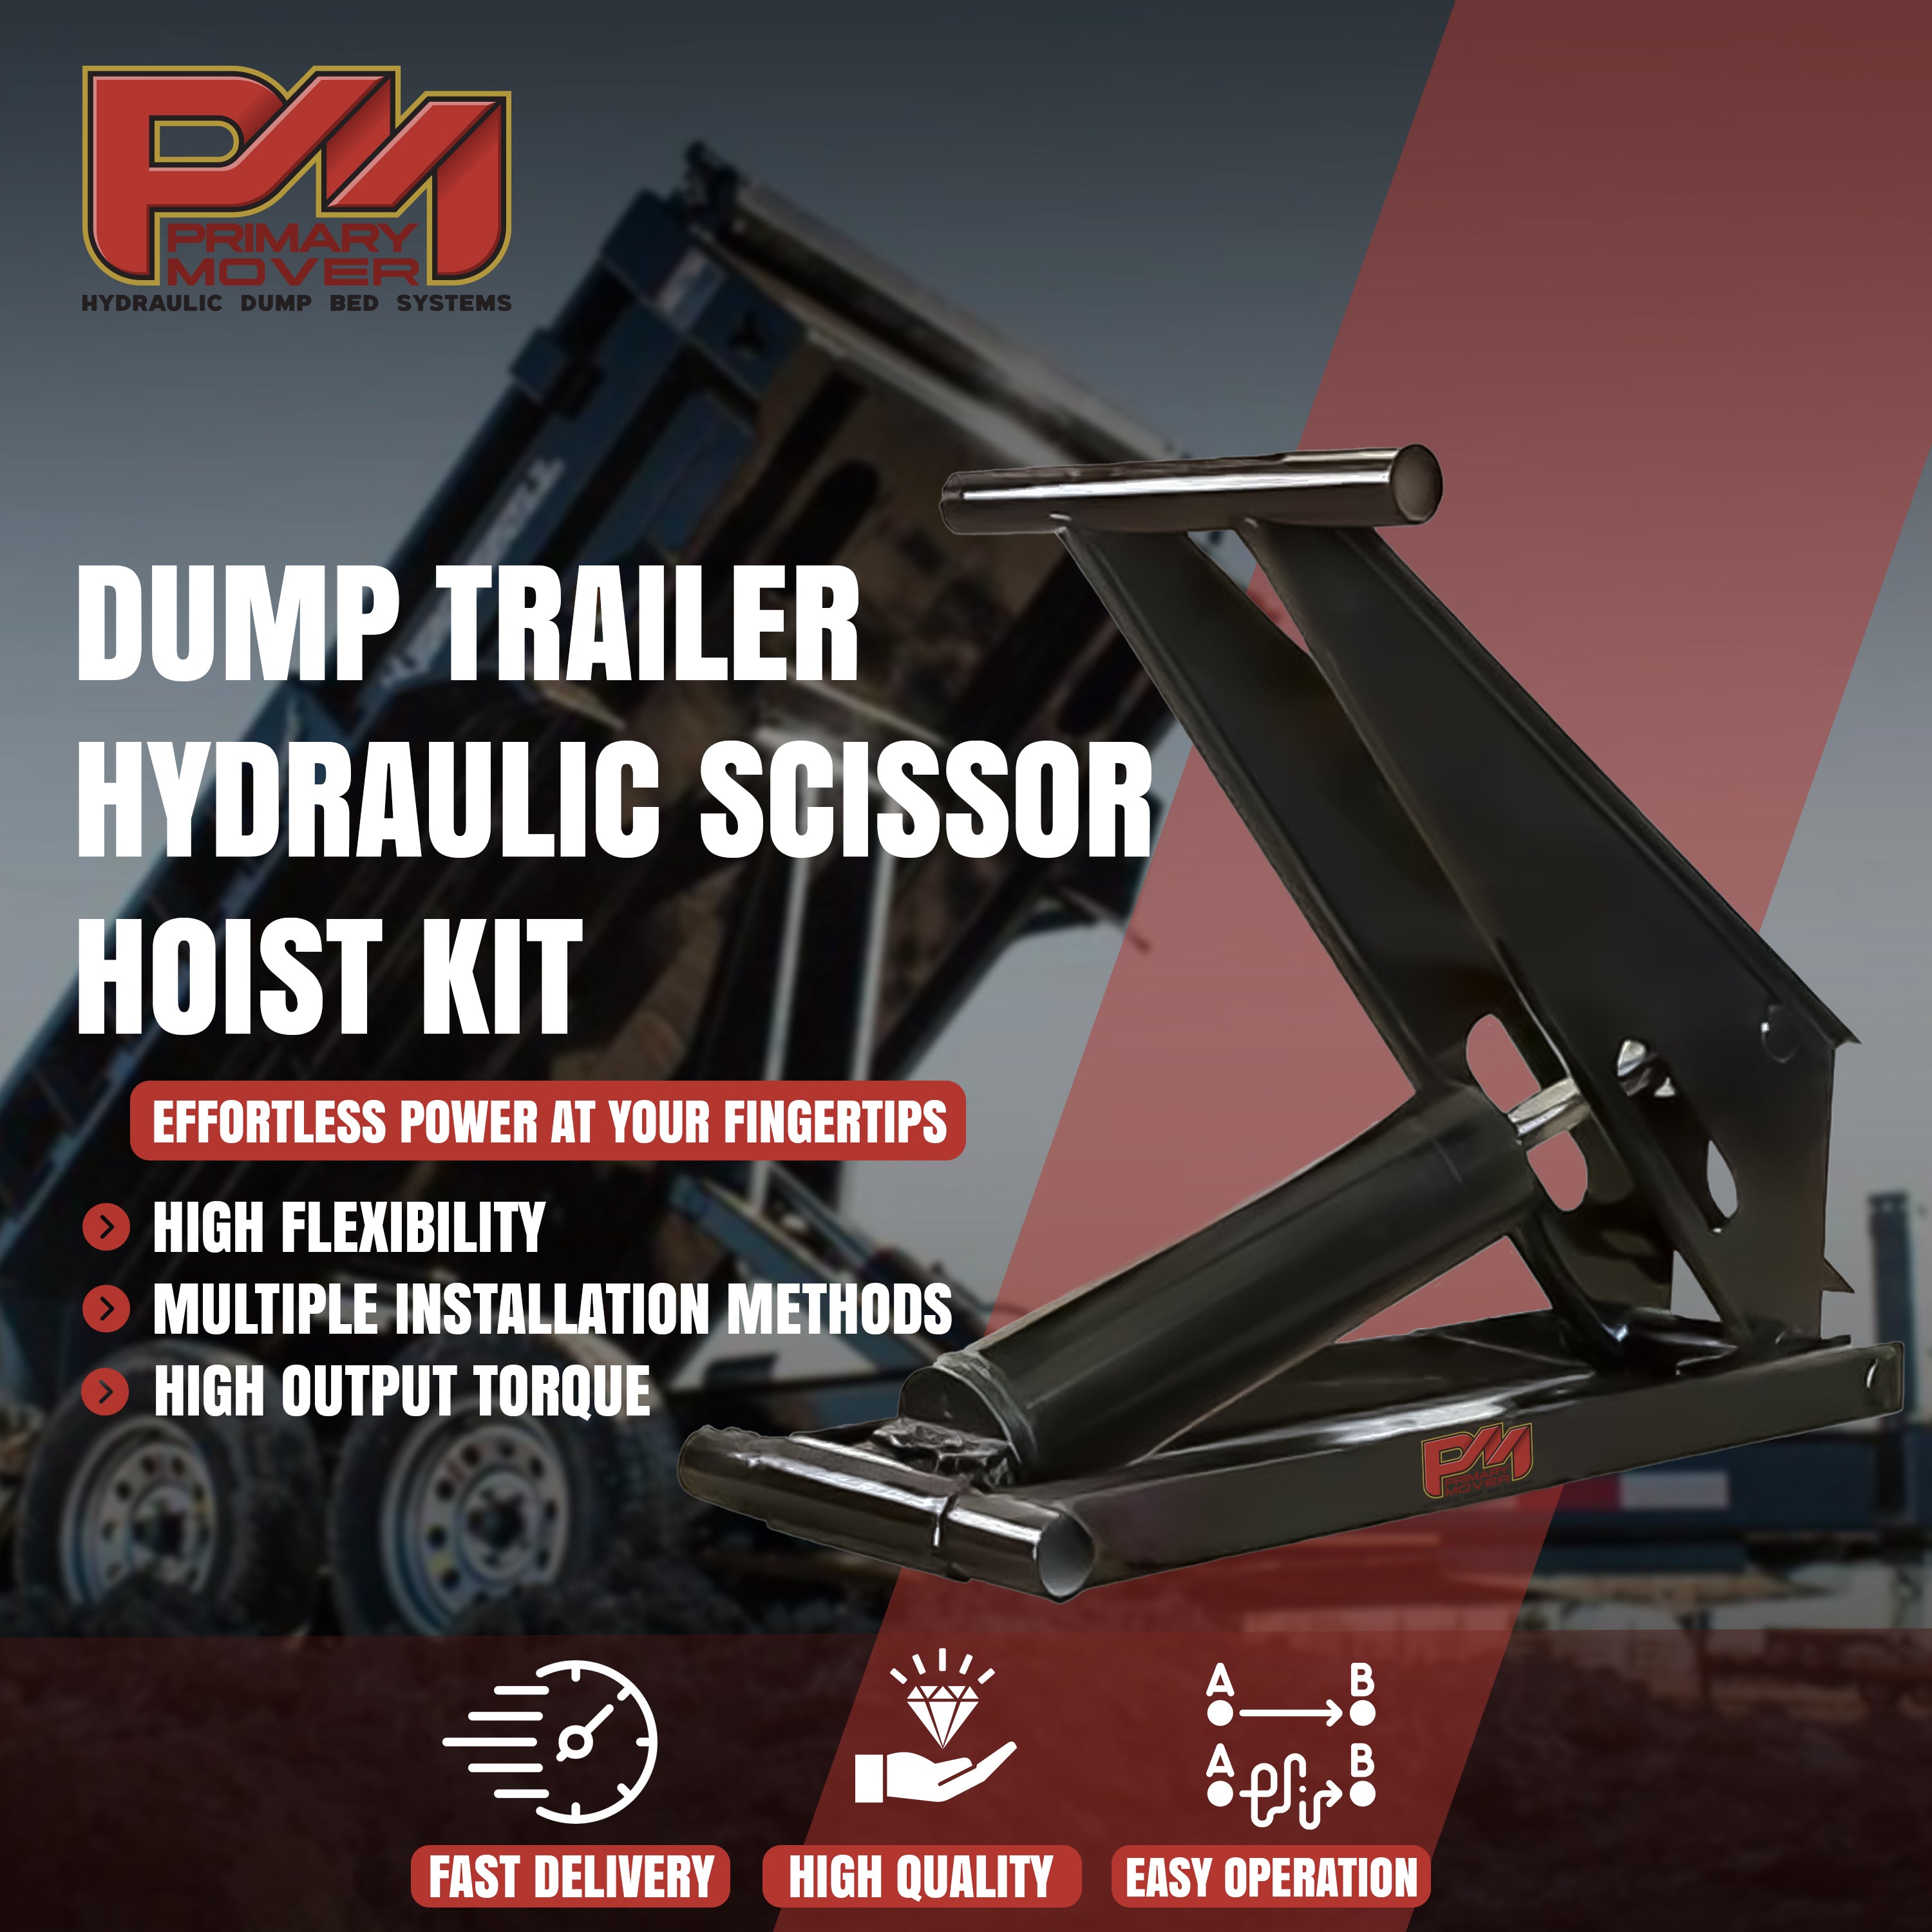 Hydraulic Scissor Hoist Kit - 11 Ton Capacity - Fits 16-20' Dump Body | PF-621-6: A black metal lifter with red and white text, including cylinder, mounting brackets, hydraulic pump, safety features, and more.